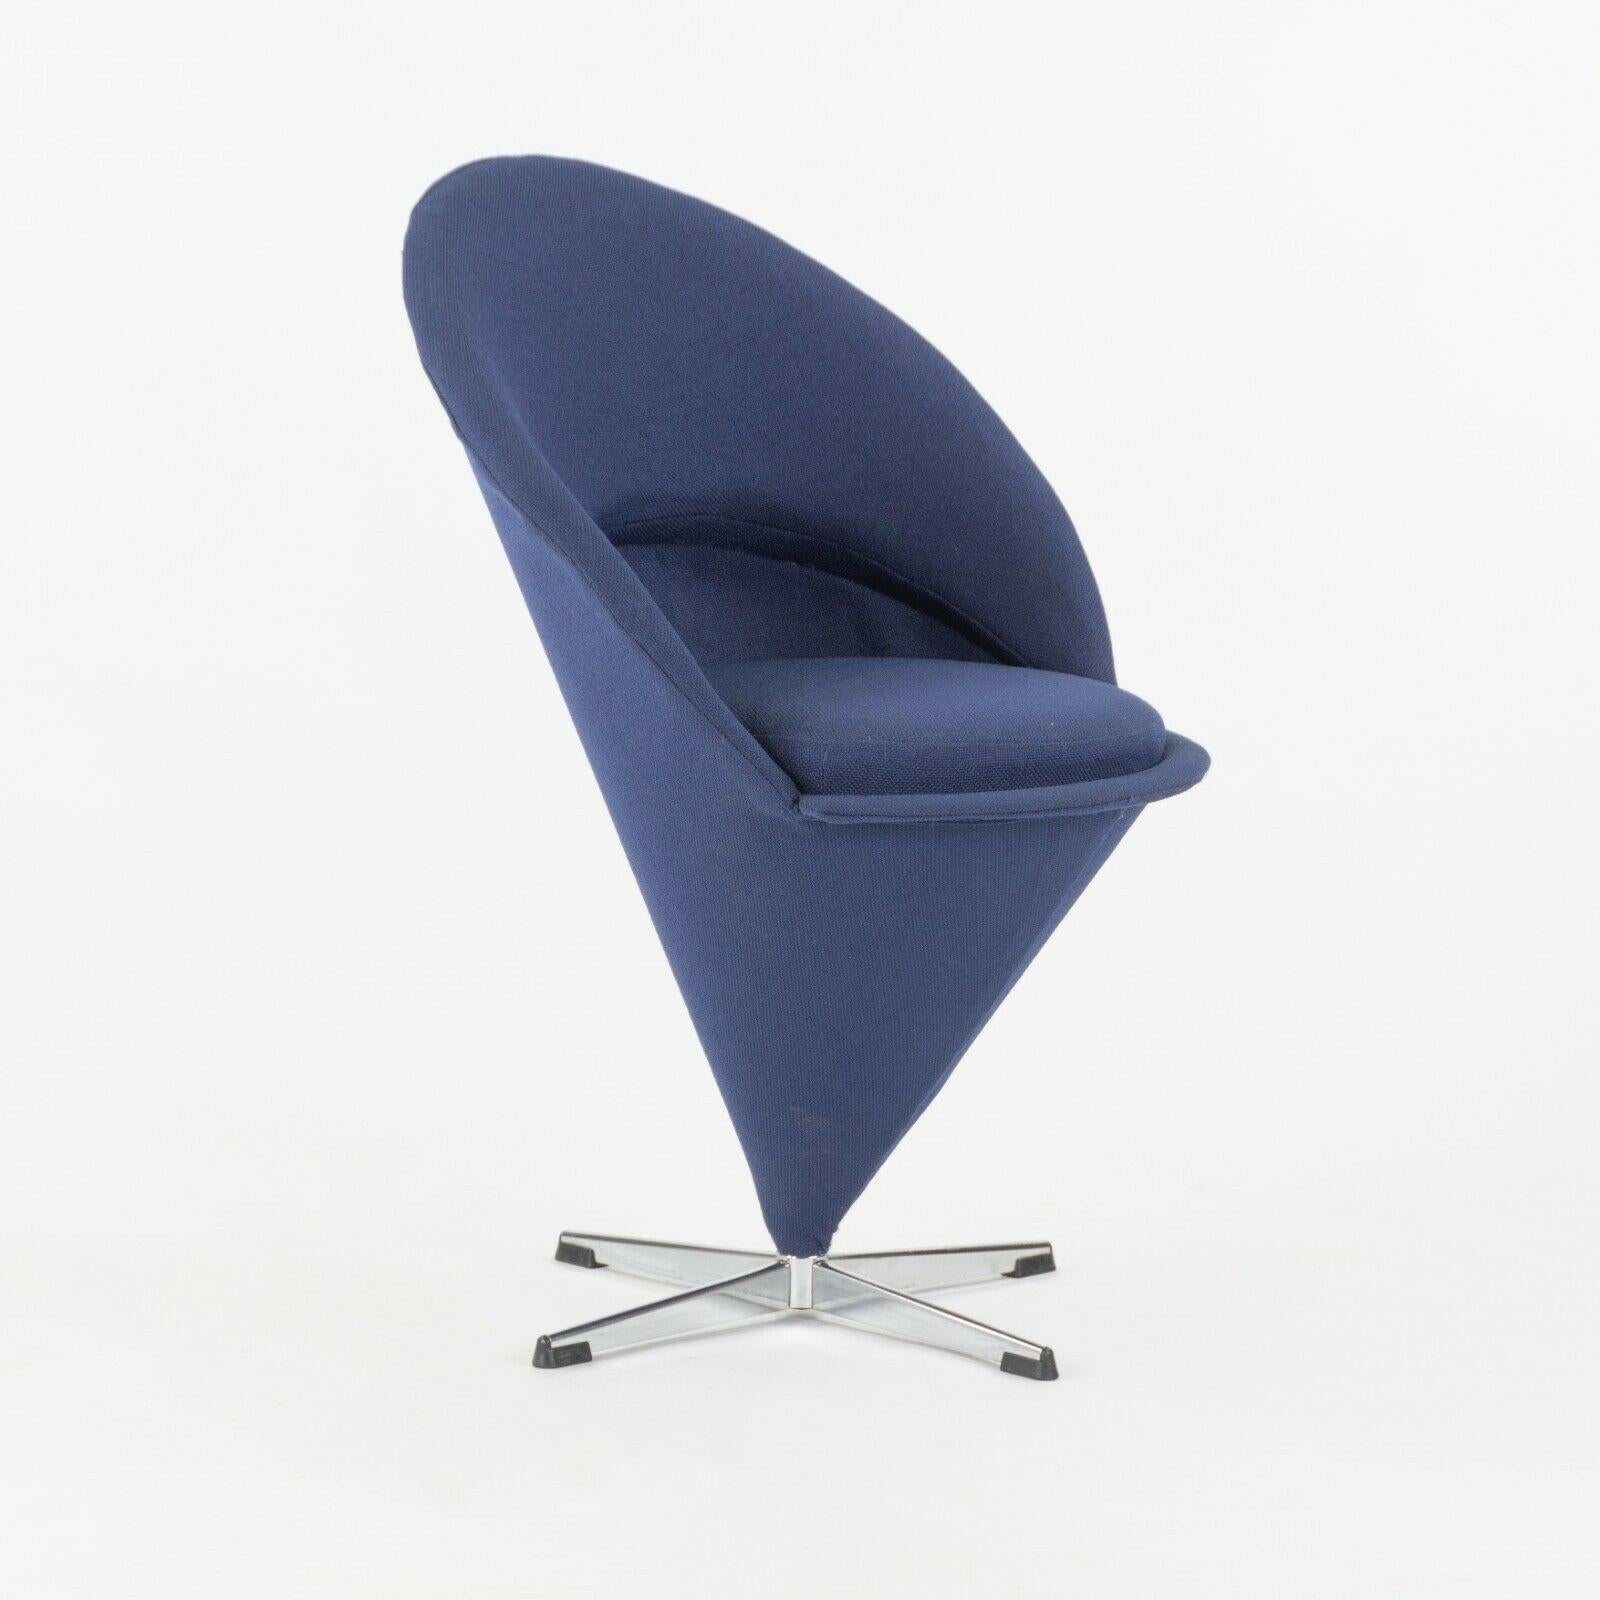 Listed for sale is an original cone chair, designed by Verner Panton and produced by Plus-Linje. Whereas the current variations and now produced by Vitra, this early example was produced by the lesser known Plus-Linje company. The cone chair is one